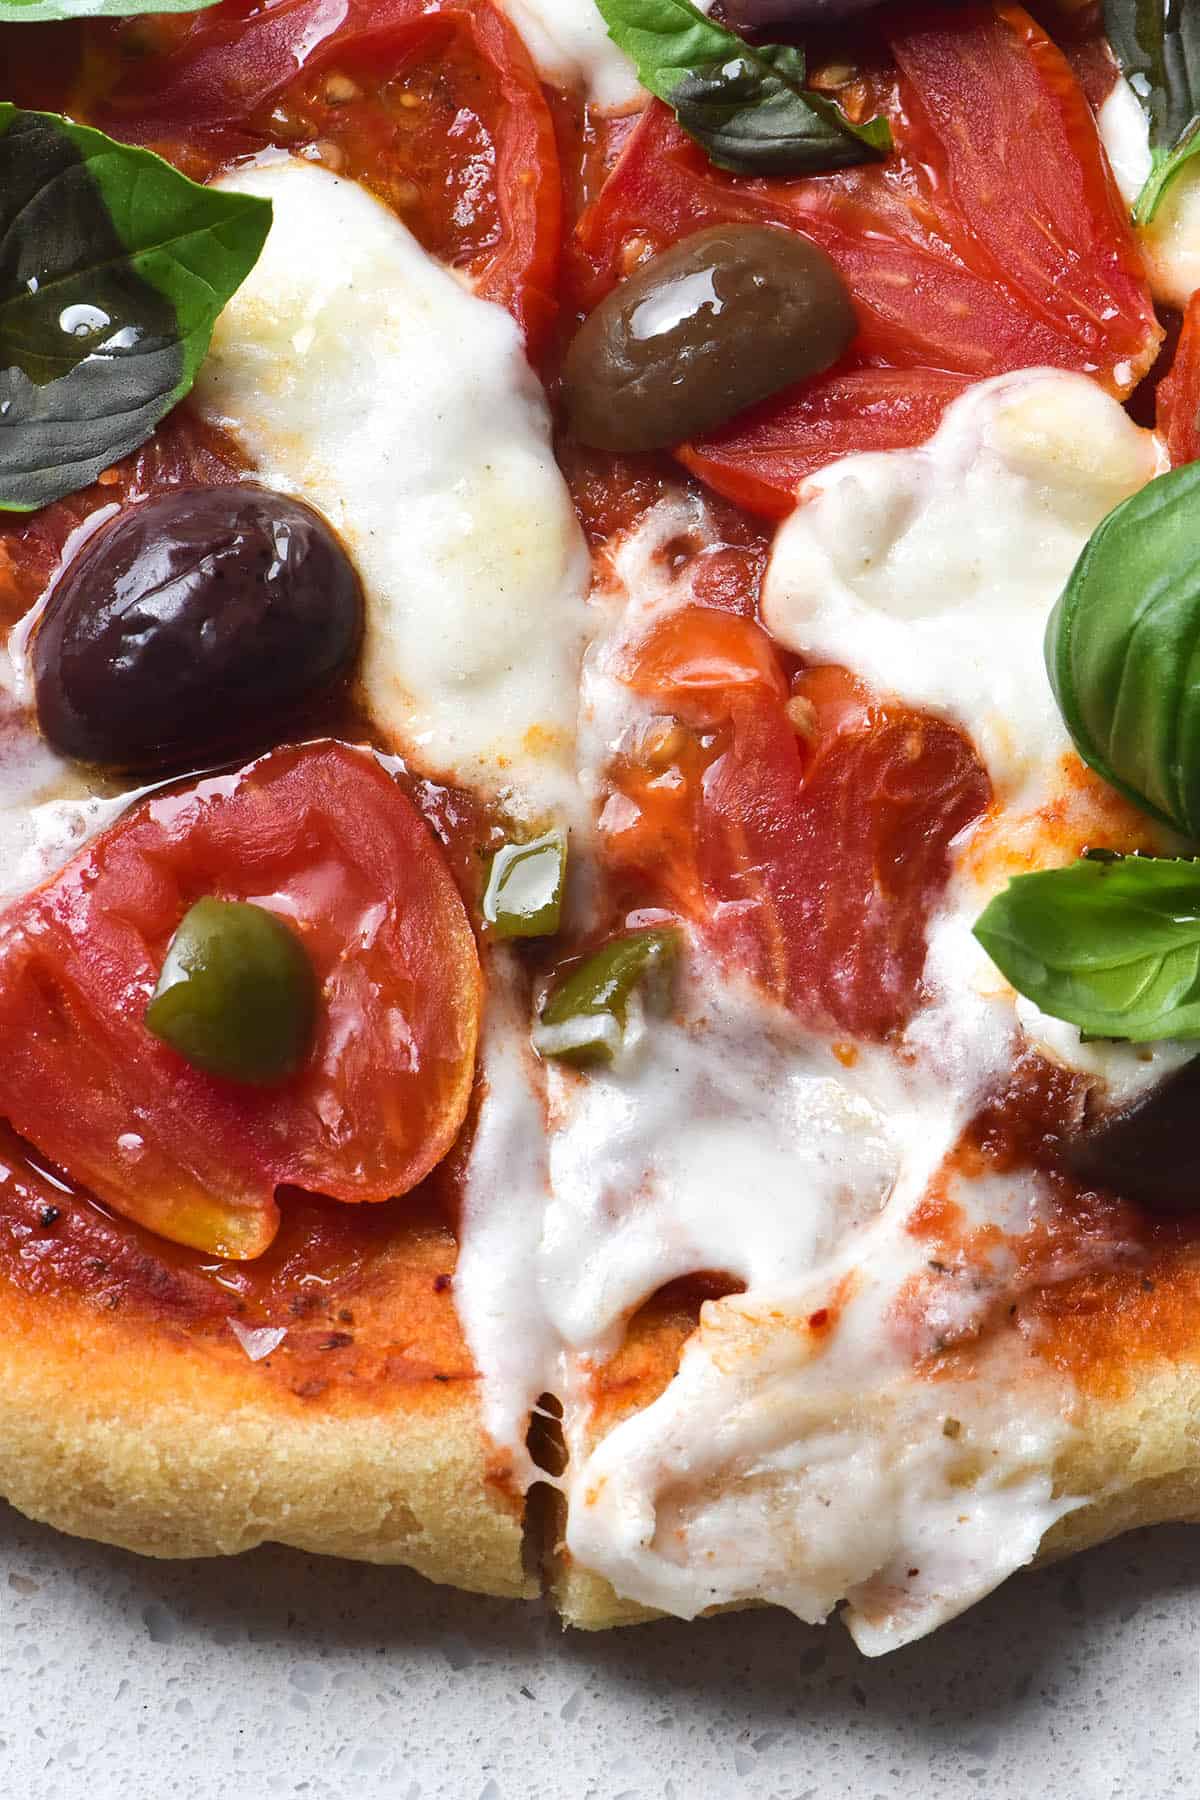 A close up view of a pizza topped with pizza sauce, olives, heirloom tomatoes, basil and melty vegan mozzarella. The pizza has a slice down the centre and sits on a white stone benchtop.